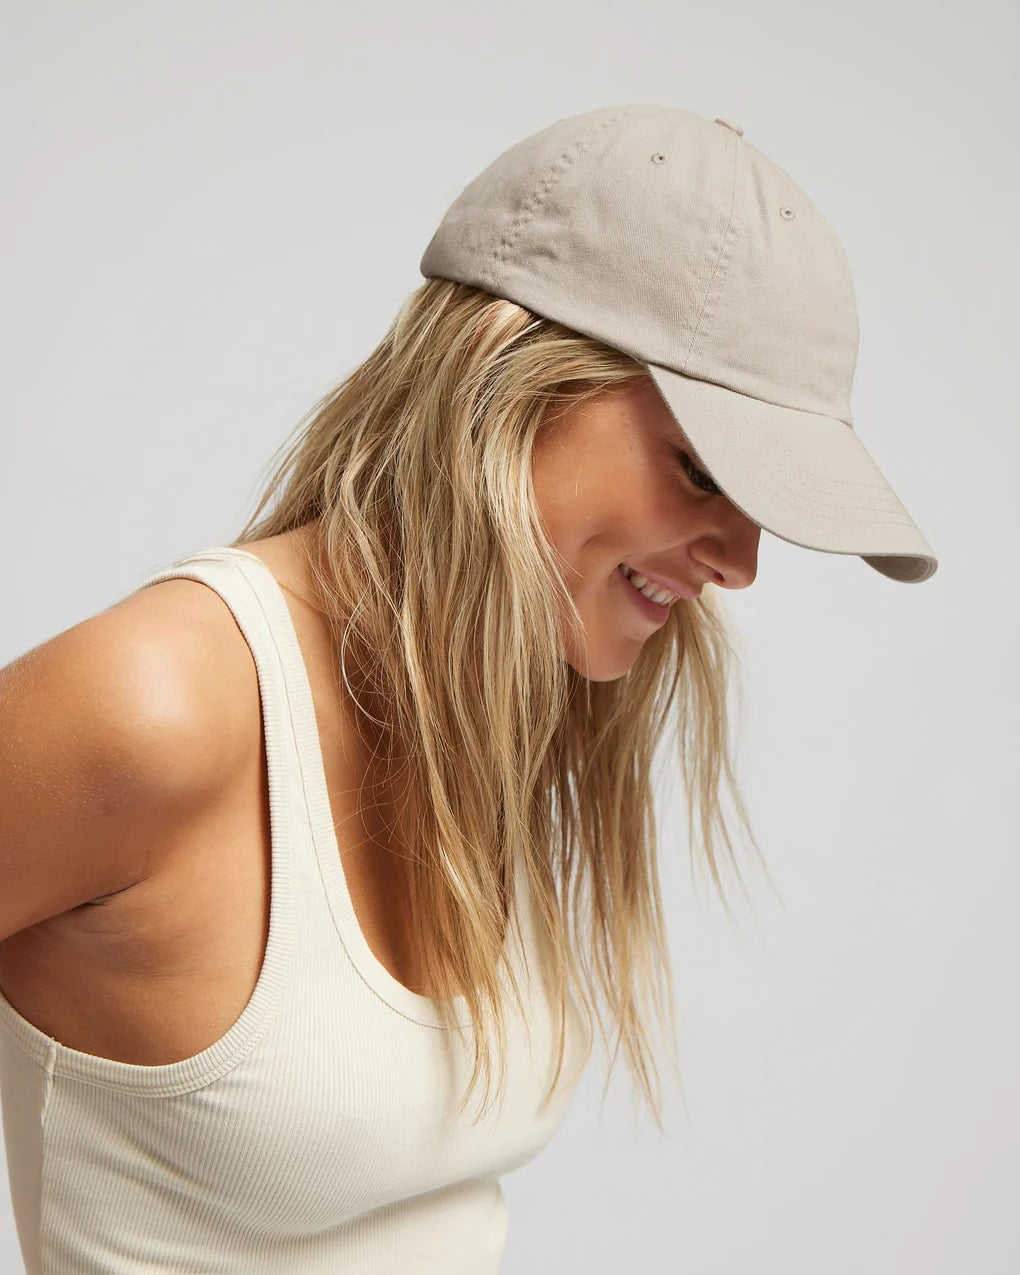 Woman smiling downward wearing a beige baseball cap and a soft and comfortable Colorful Standard organic cotton tank top.